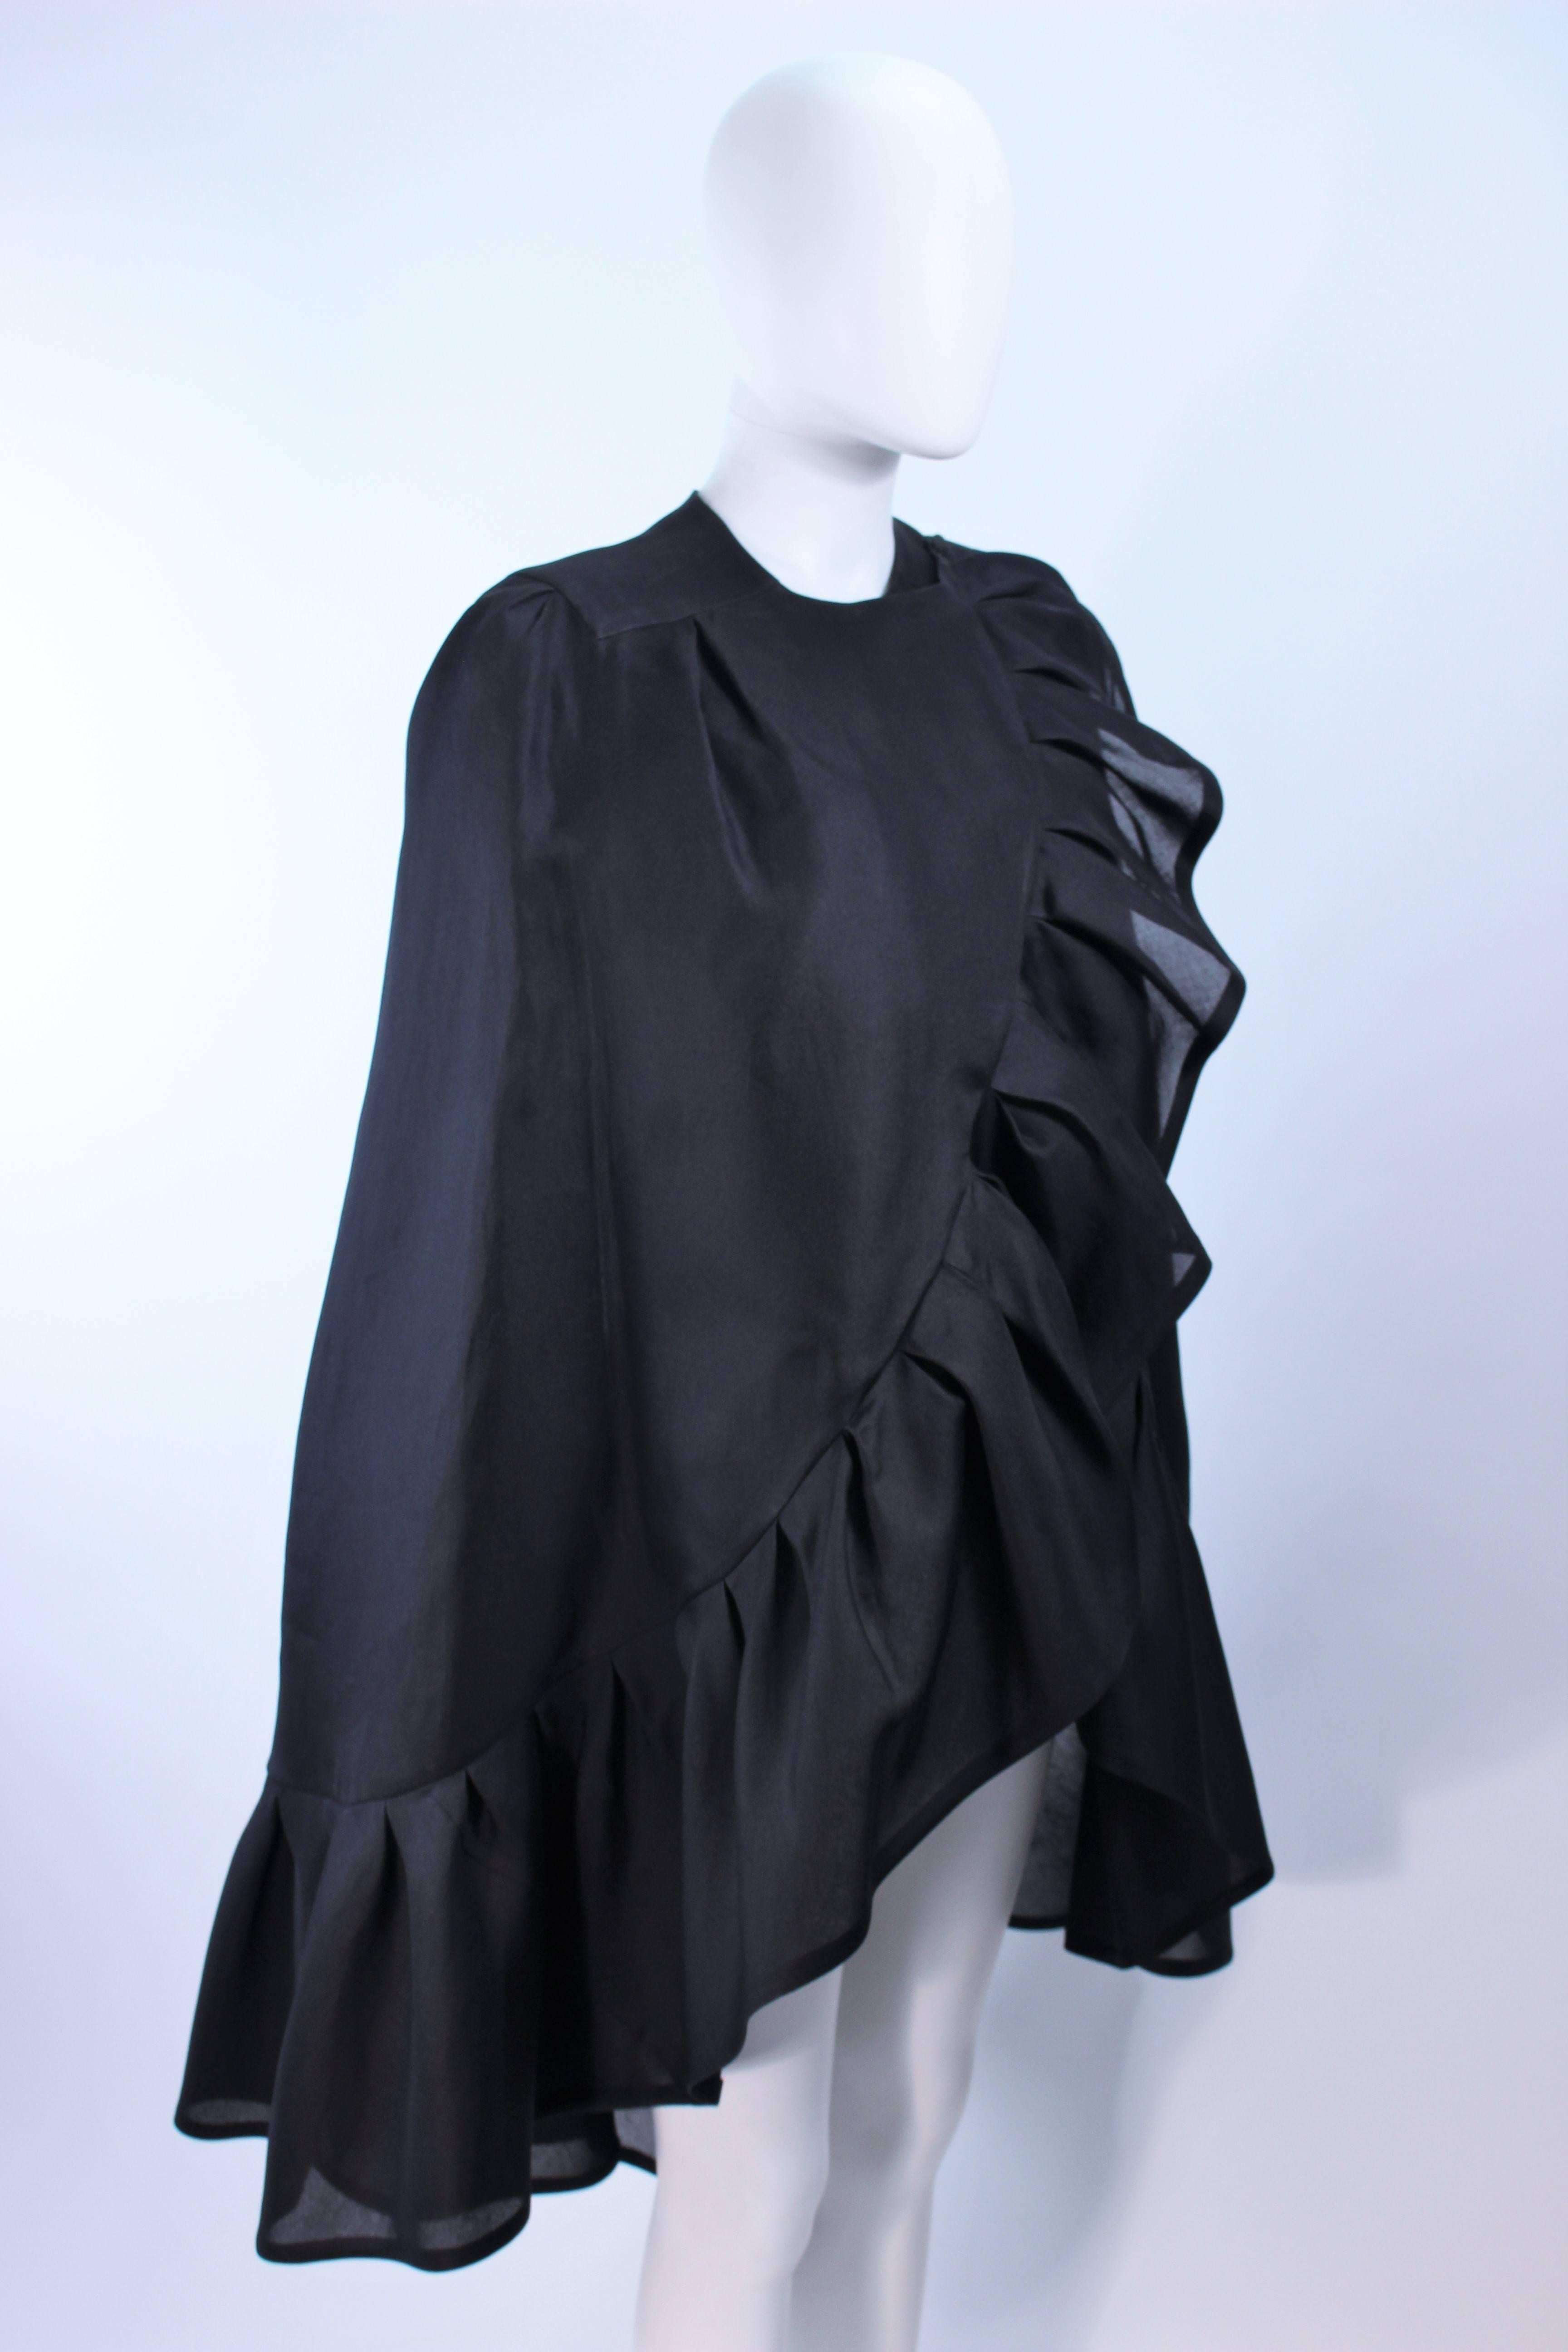 ANDRE LAUG ITALY Black Silk Ruffle Evening Cape For Sale 1